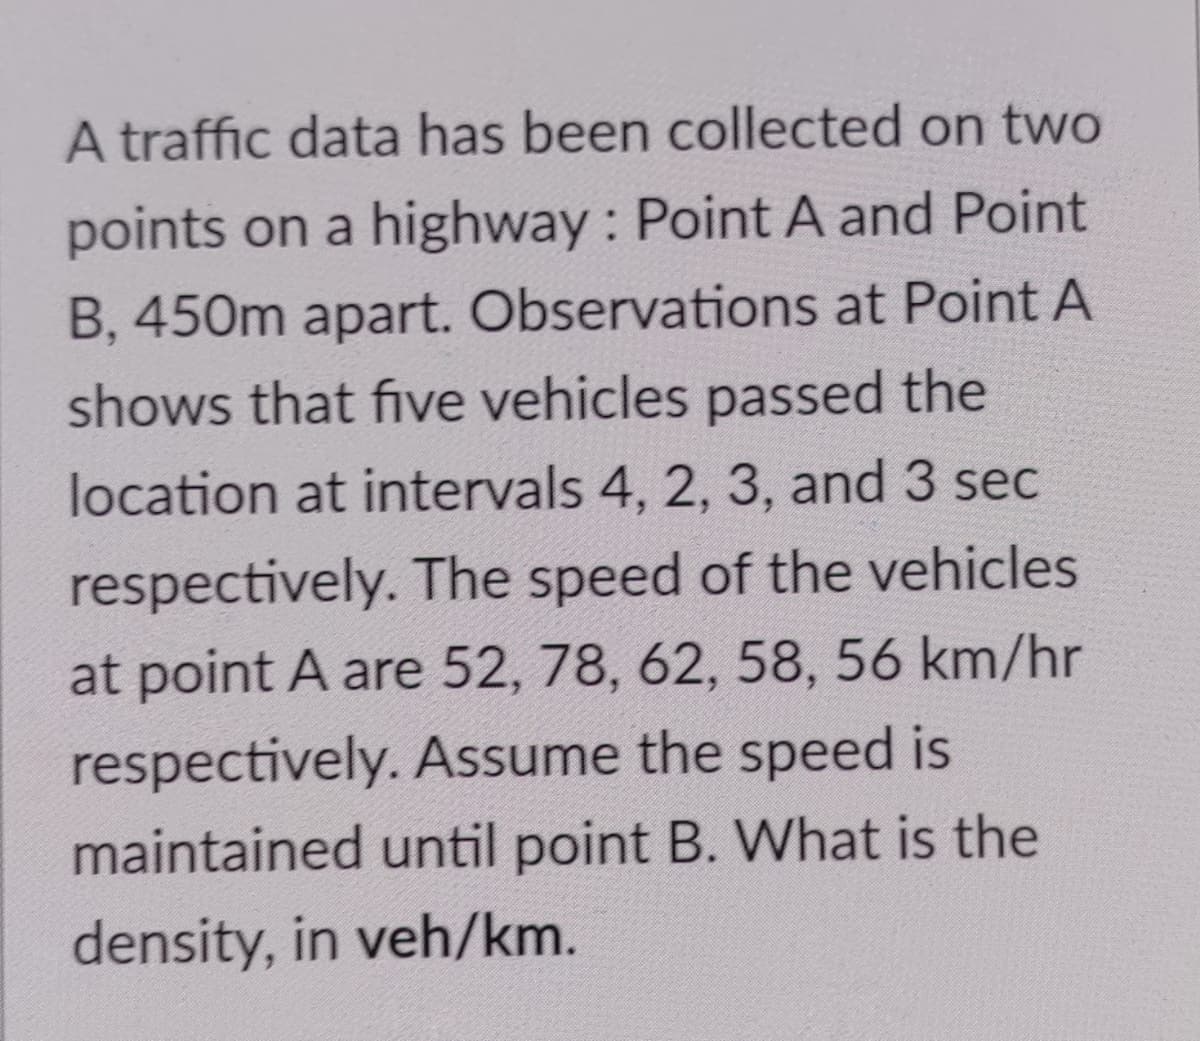 A traffic data has been collected on two
points on a highway : Point A and Point
B, 450m apart. Observations at Point A
shows that five vehicles passed the
location at intervals 4, 2, 3, and 3 sec
respectively. The speed of the vehicles
at point A are 52, 78, 62, 58, 56 km/hr
respectively. Assume the speed is
maintained until point B. What is the
density, in veh/km.
